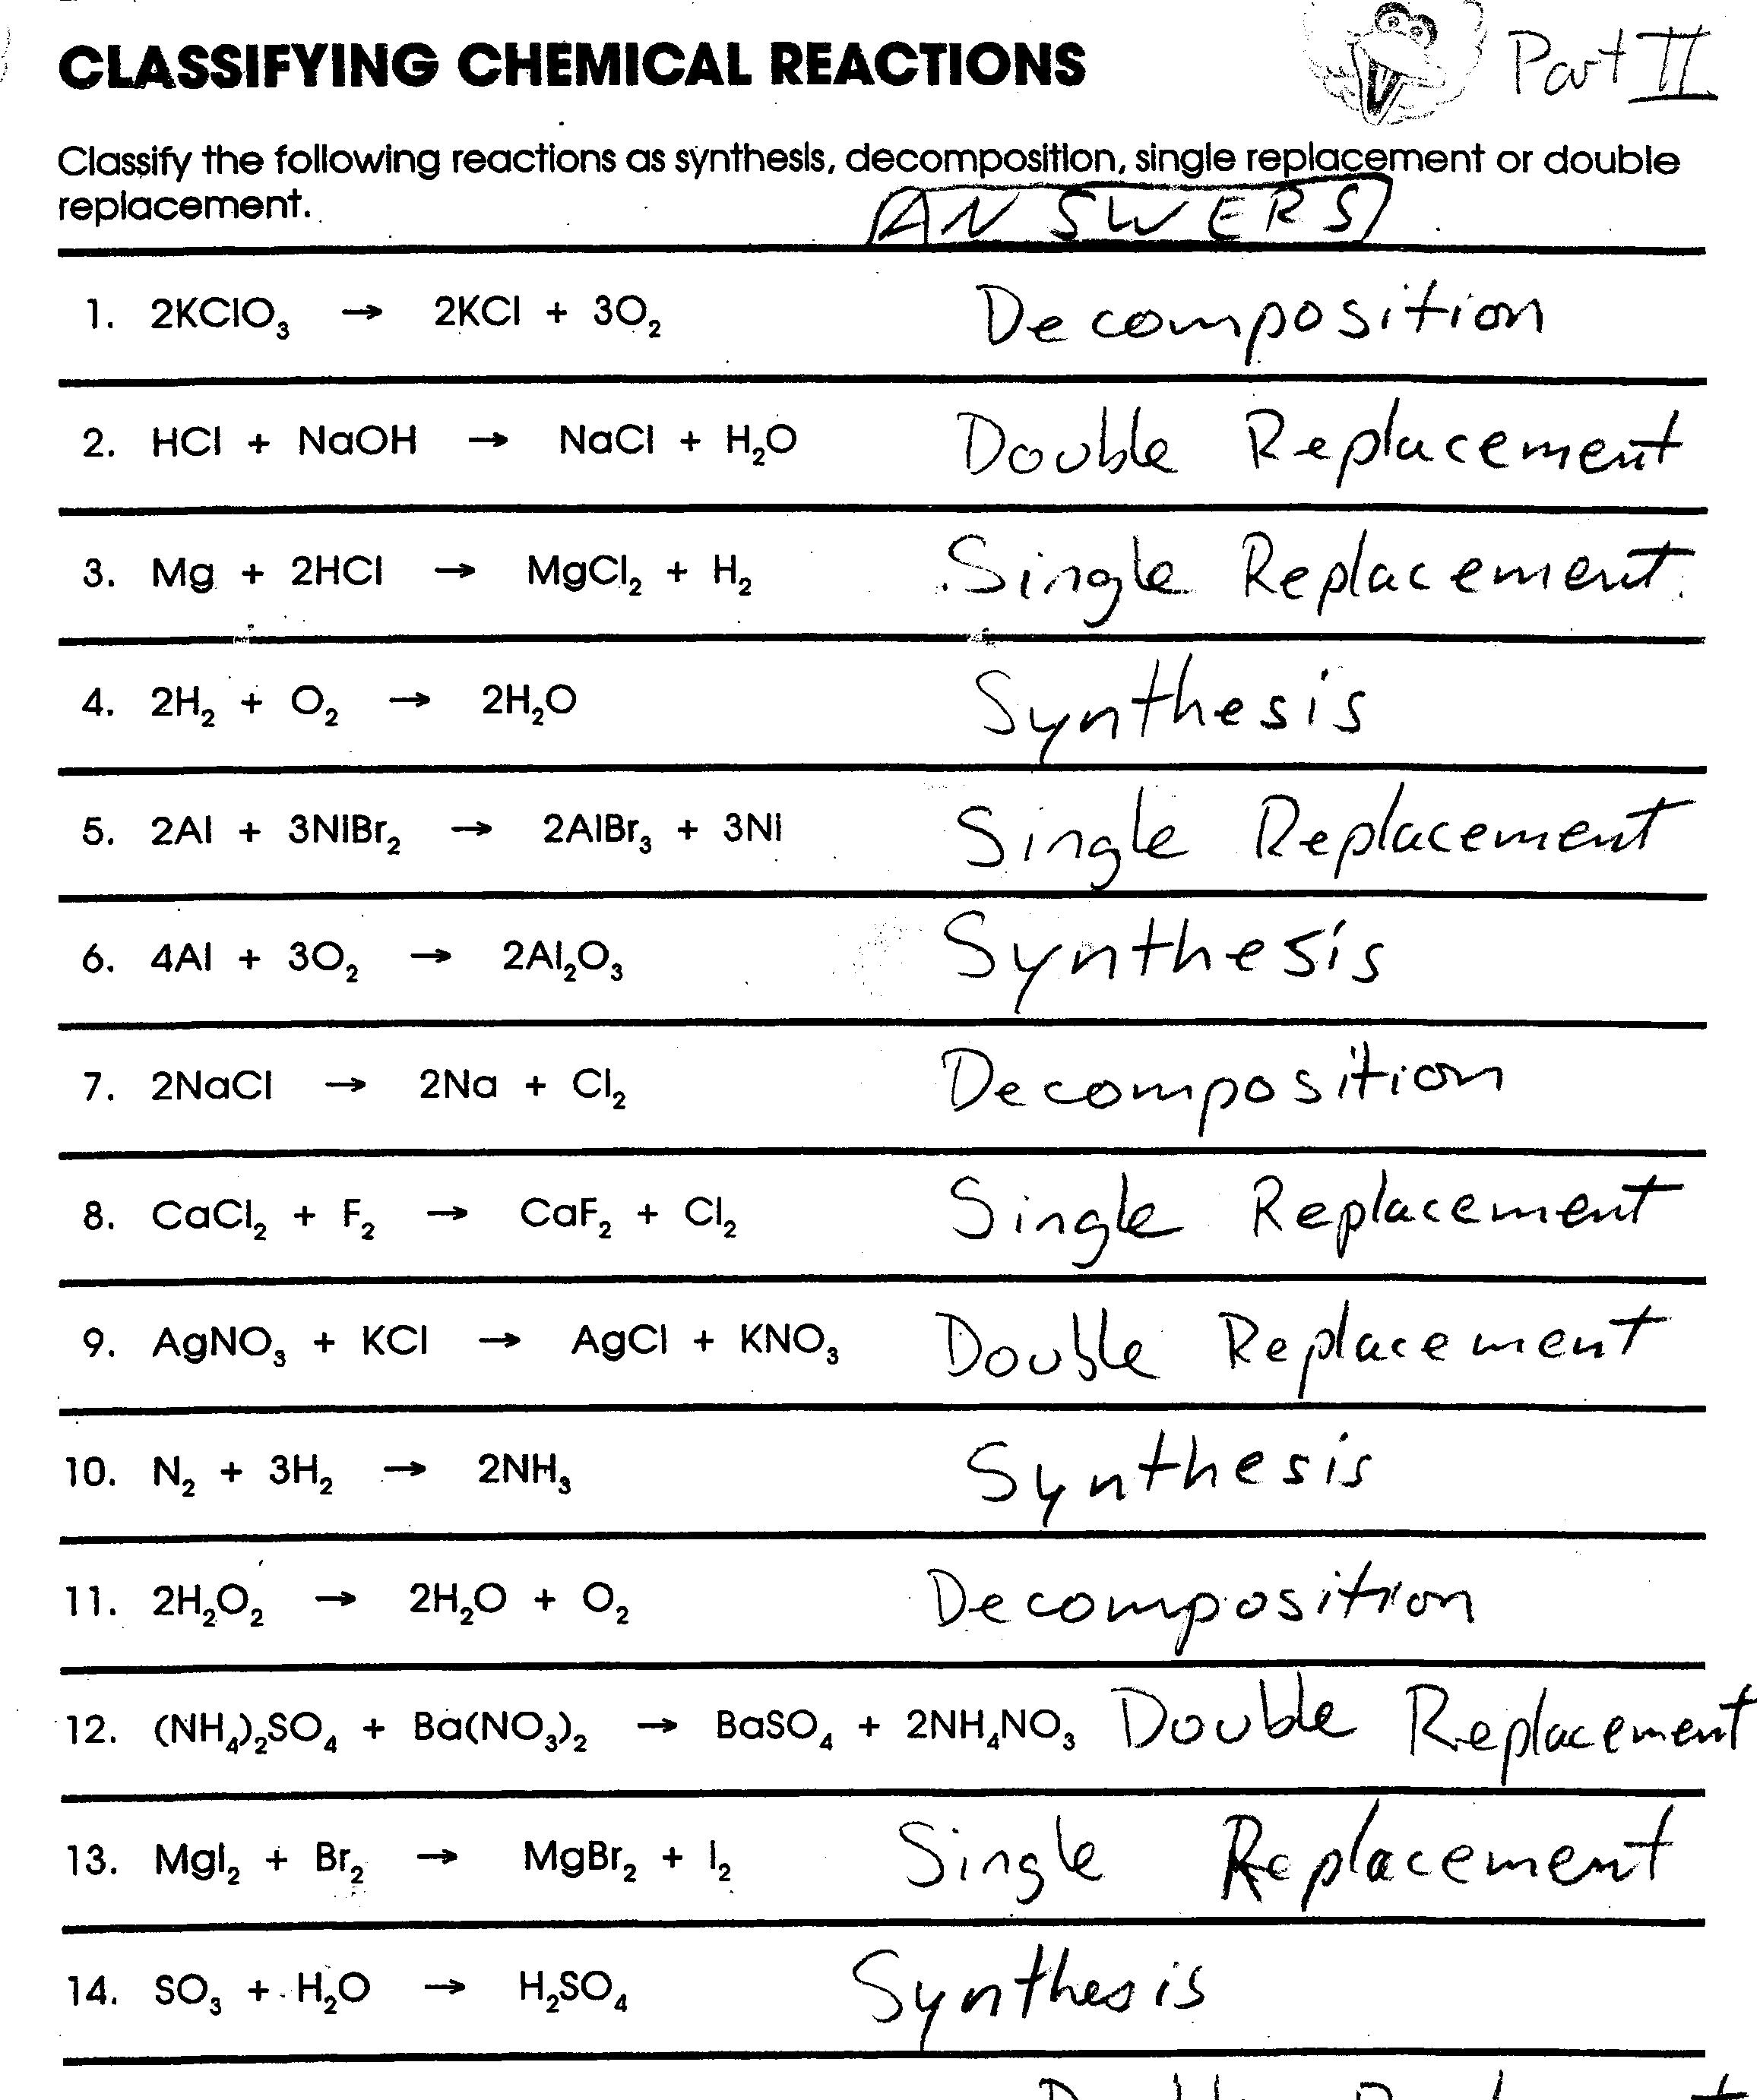 17 Best Images of Balancing Chemical Equations Worksheet 1  Balancing Chemical Equations 